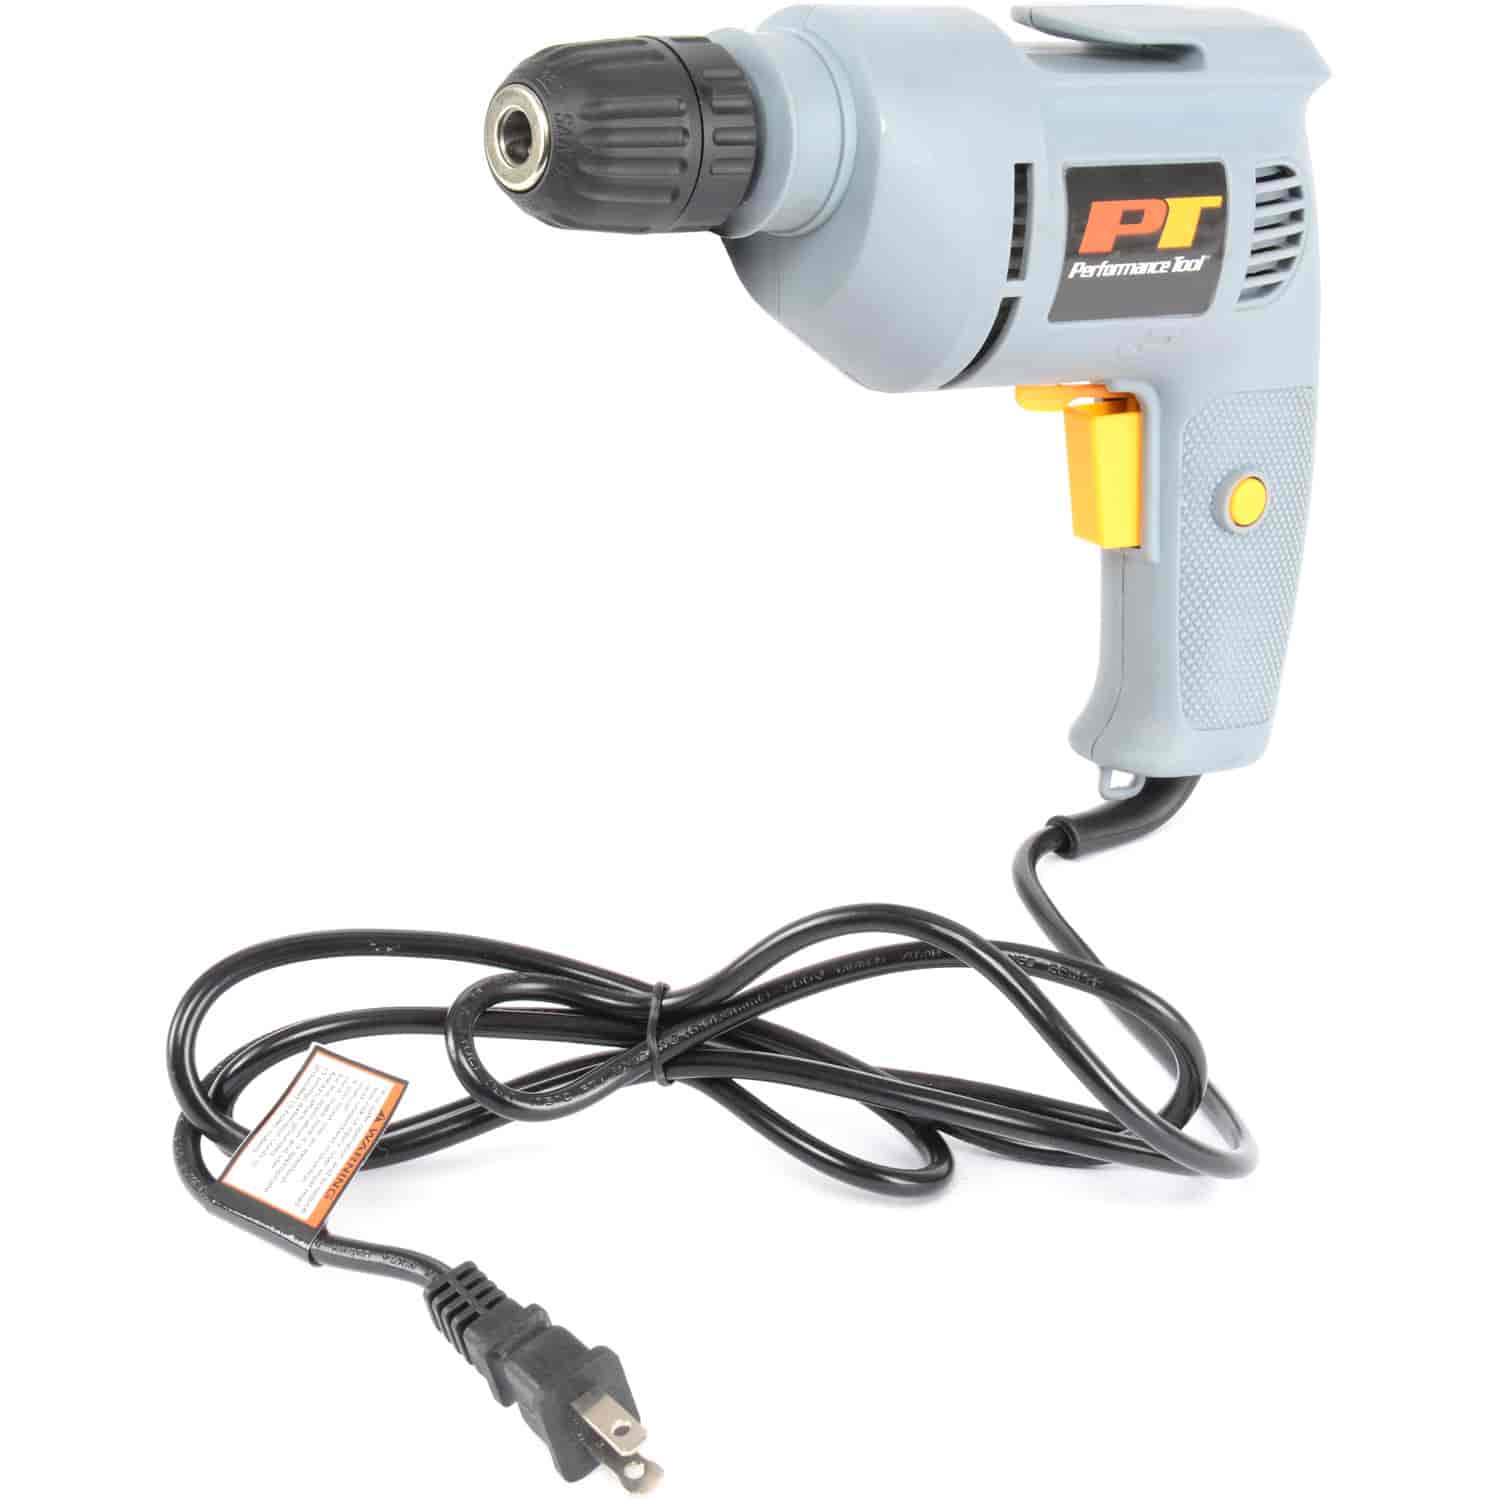 3/8" Electric Drill with Keyless Chuck